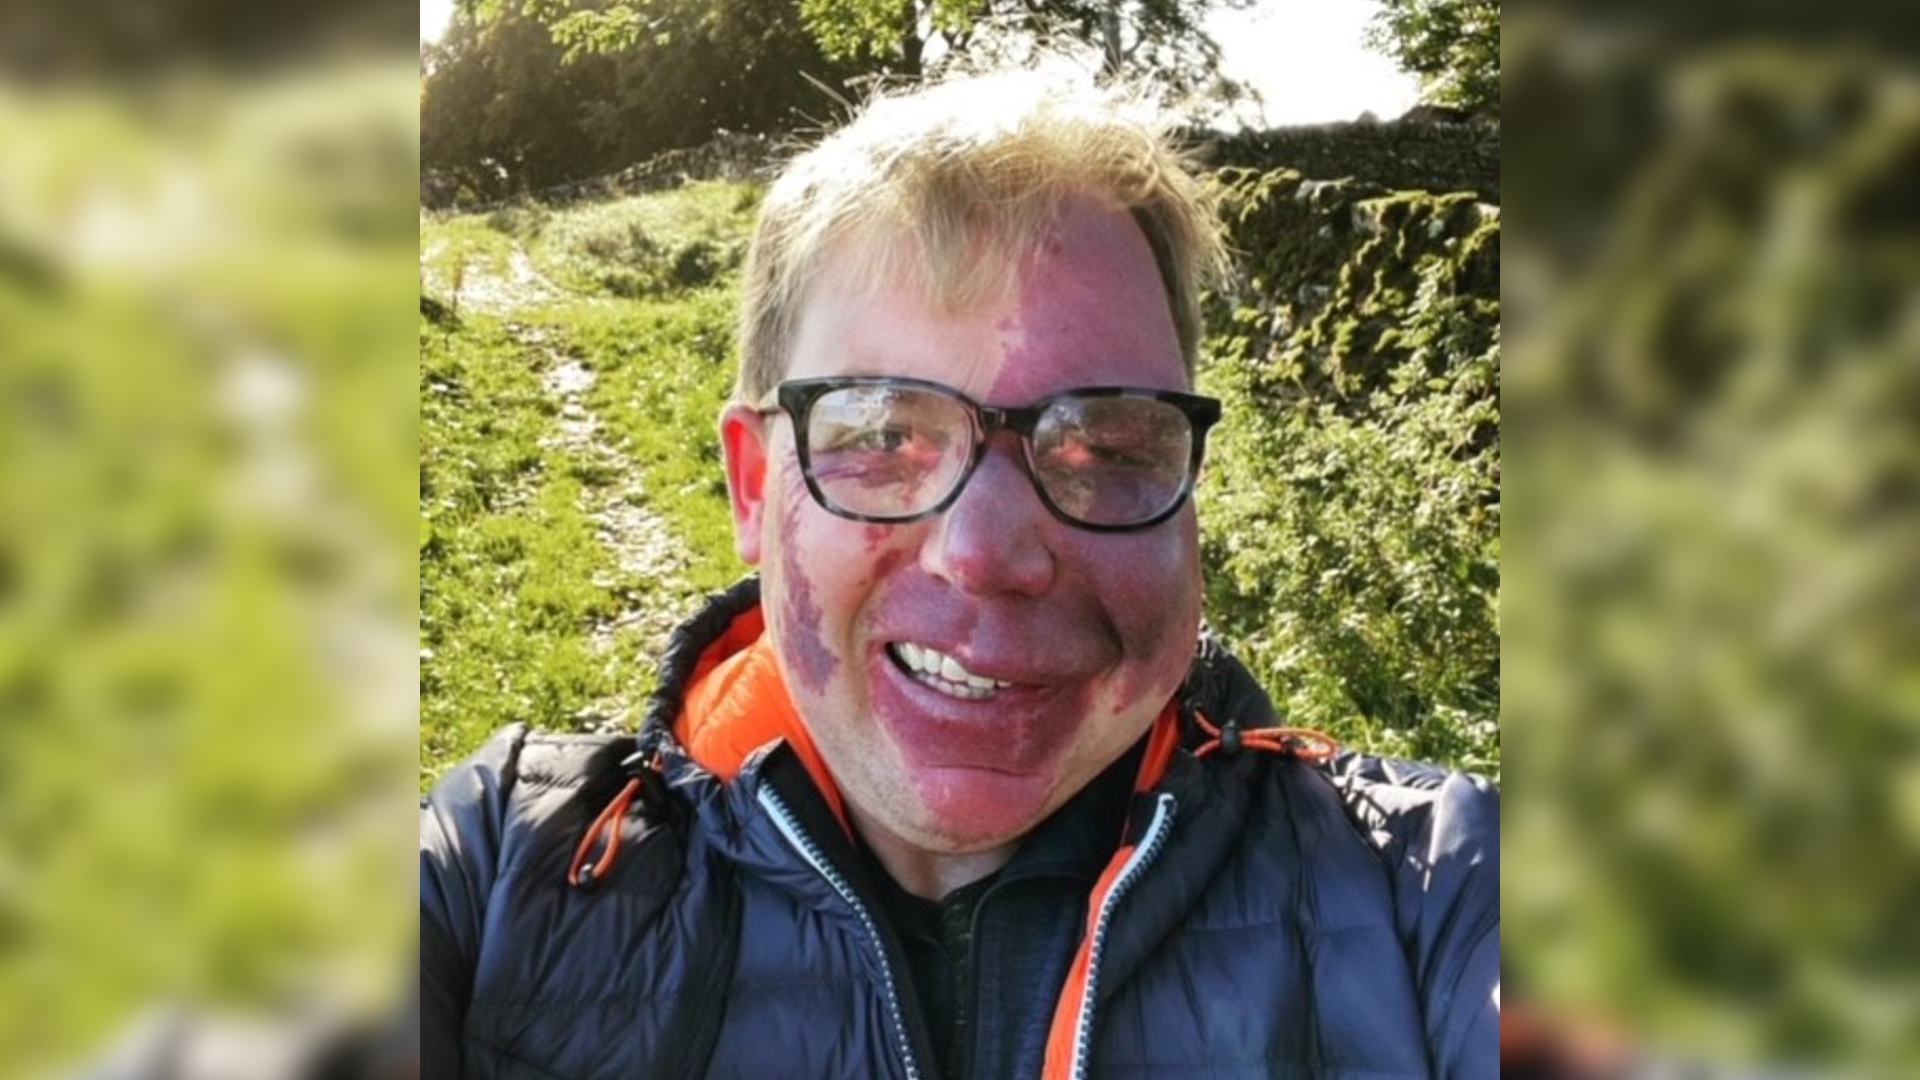 Man with glasses and port wine stain birthmark on face takes selfie in the countryside